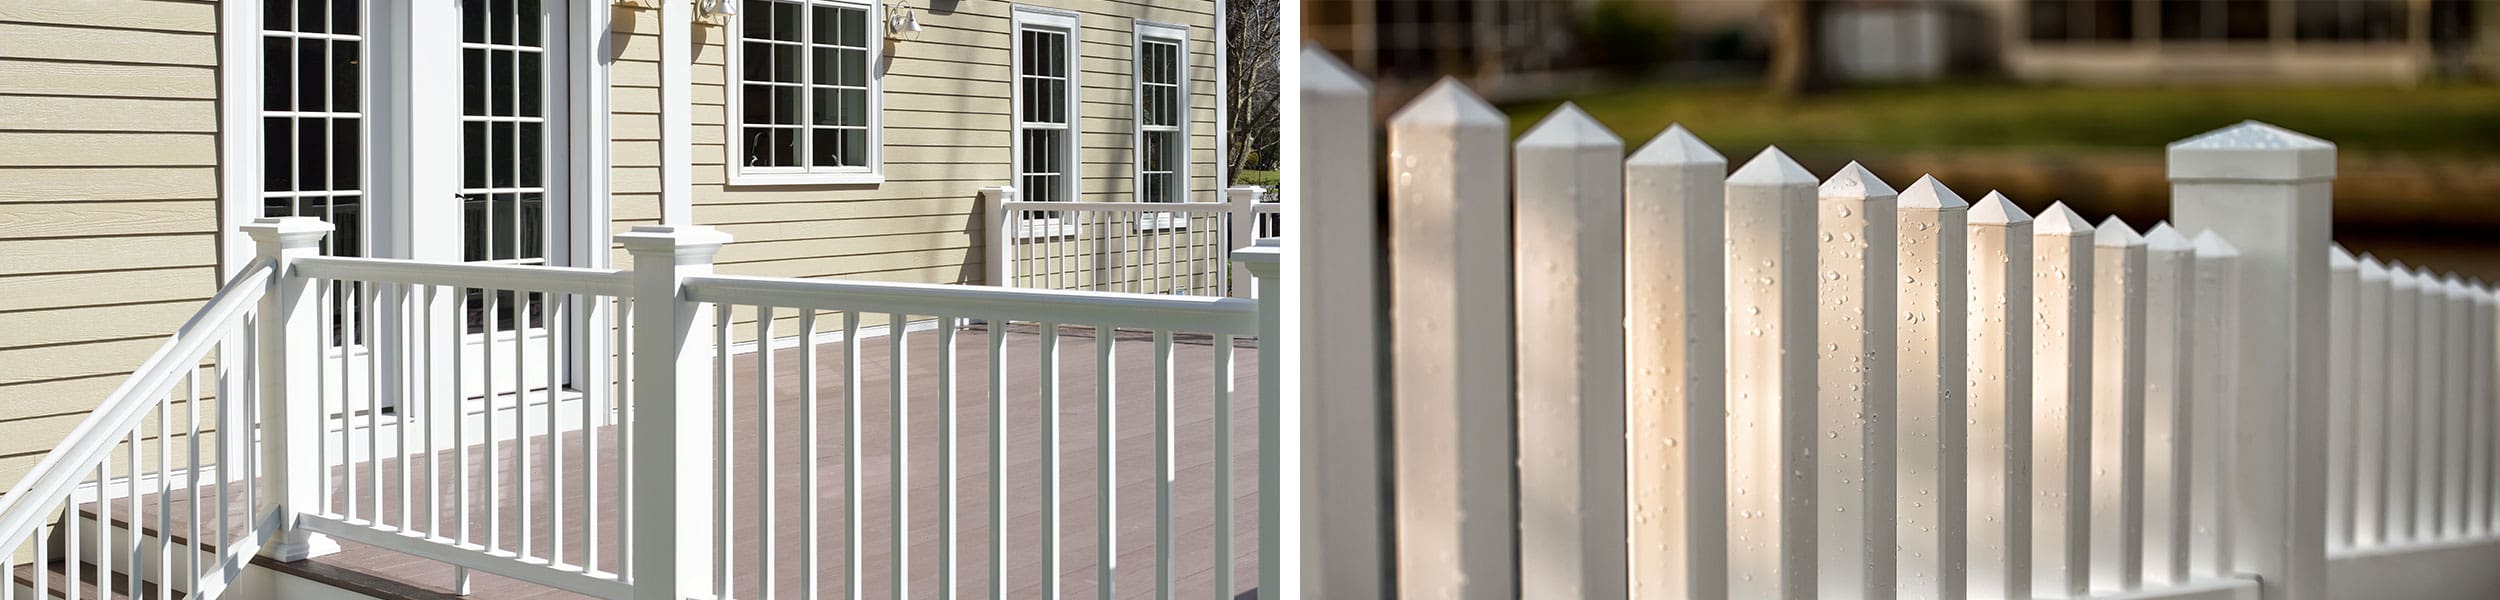 The AuroraShield™ line of PVC/Acrylic alloy capstocks are highly-weatherable, pelletized compounds designed for exterior applications such as fencing, siding, deck and rail, arbors/pergolas, windows and doors.